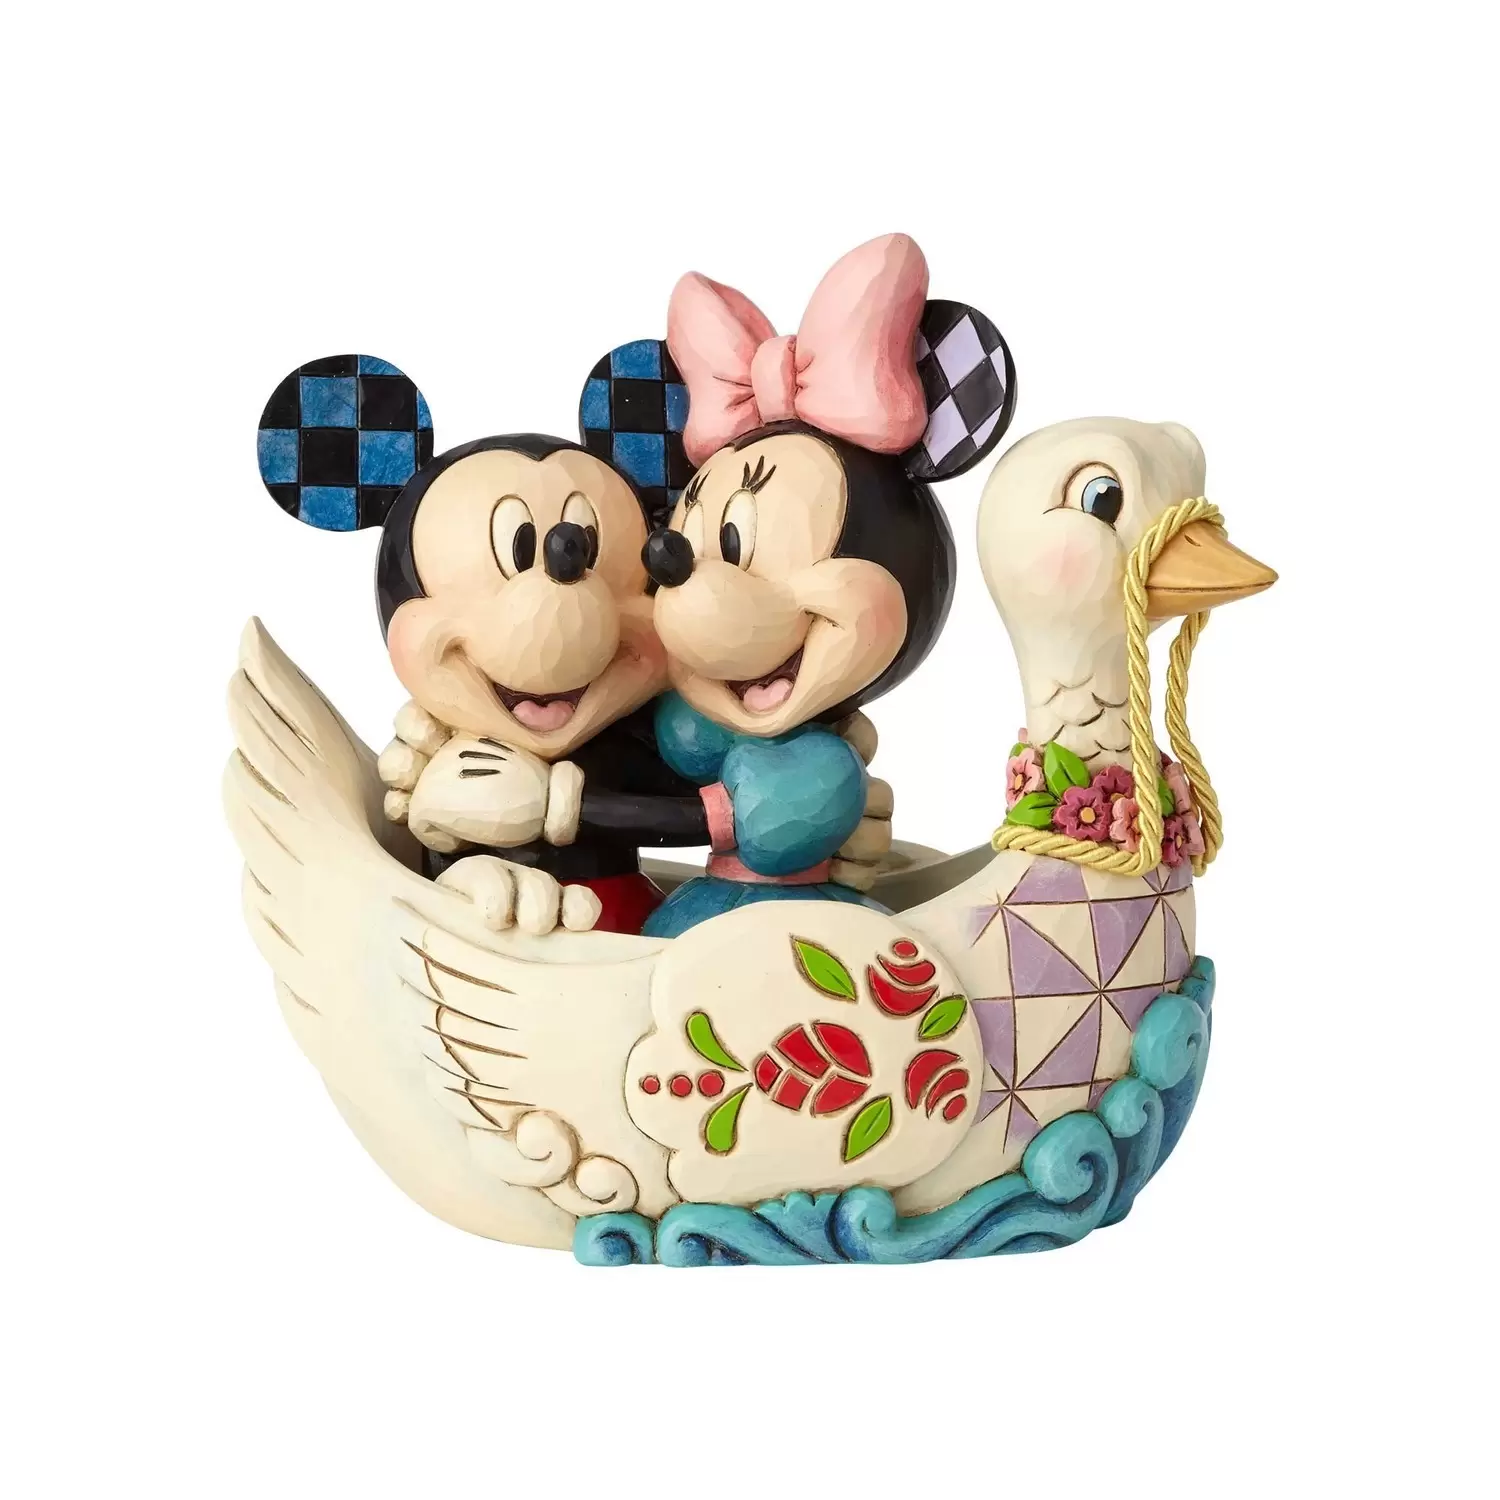 Disney Traditions by Jim Shore - Lovebirds - Mickey and Minnie in Swan